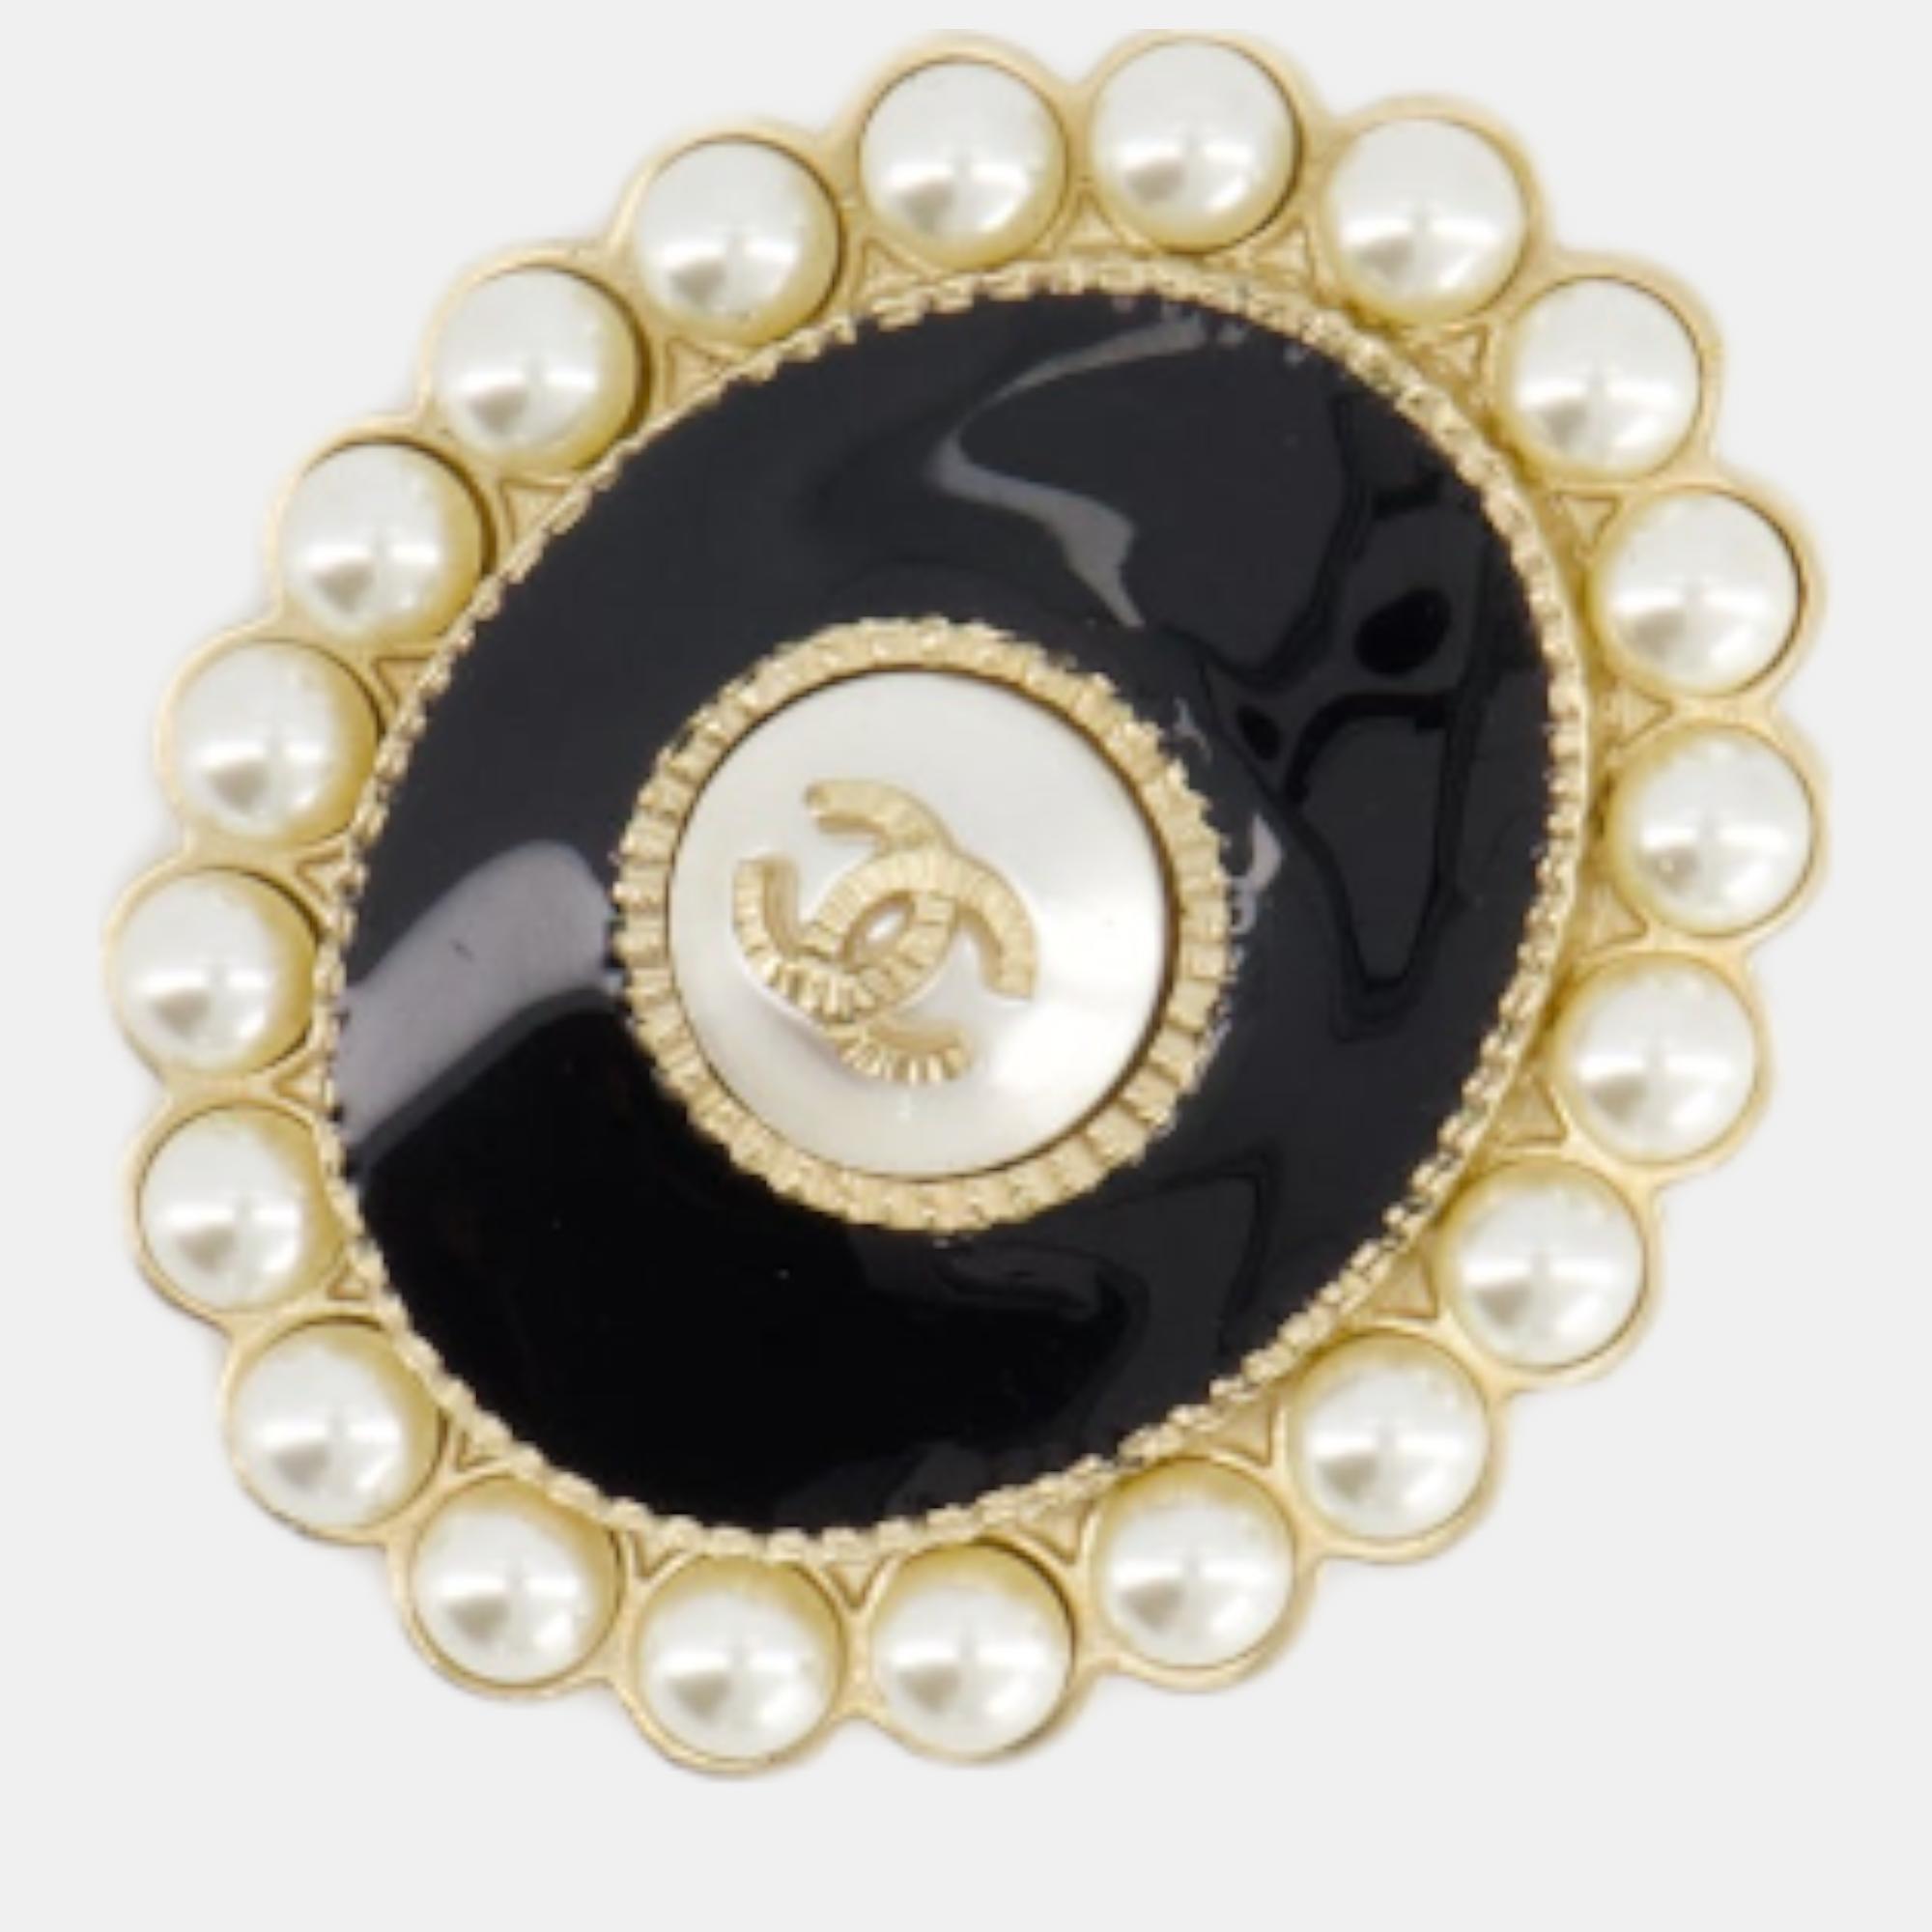 Chanel Black And Gold Oval Brooch With Gold CC And Pearl Details